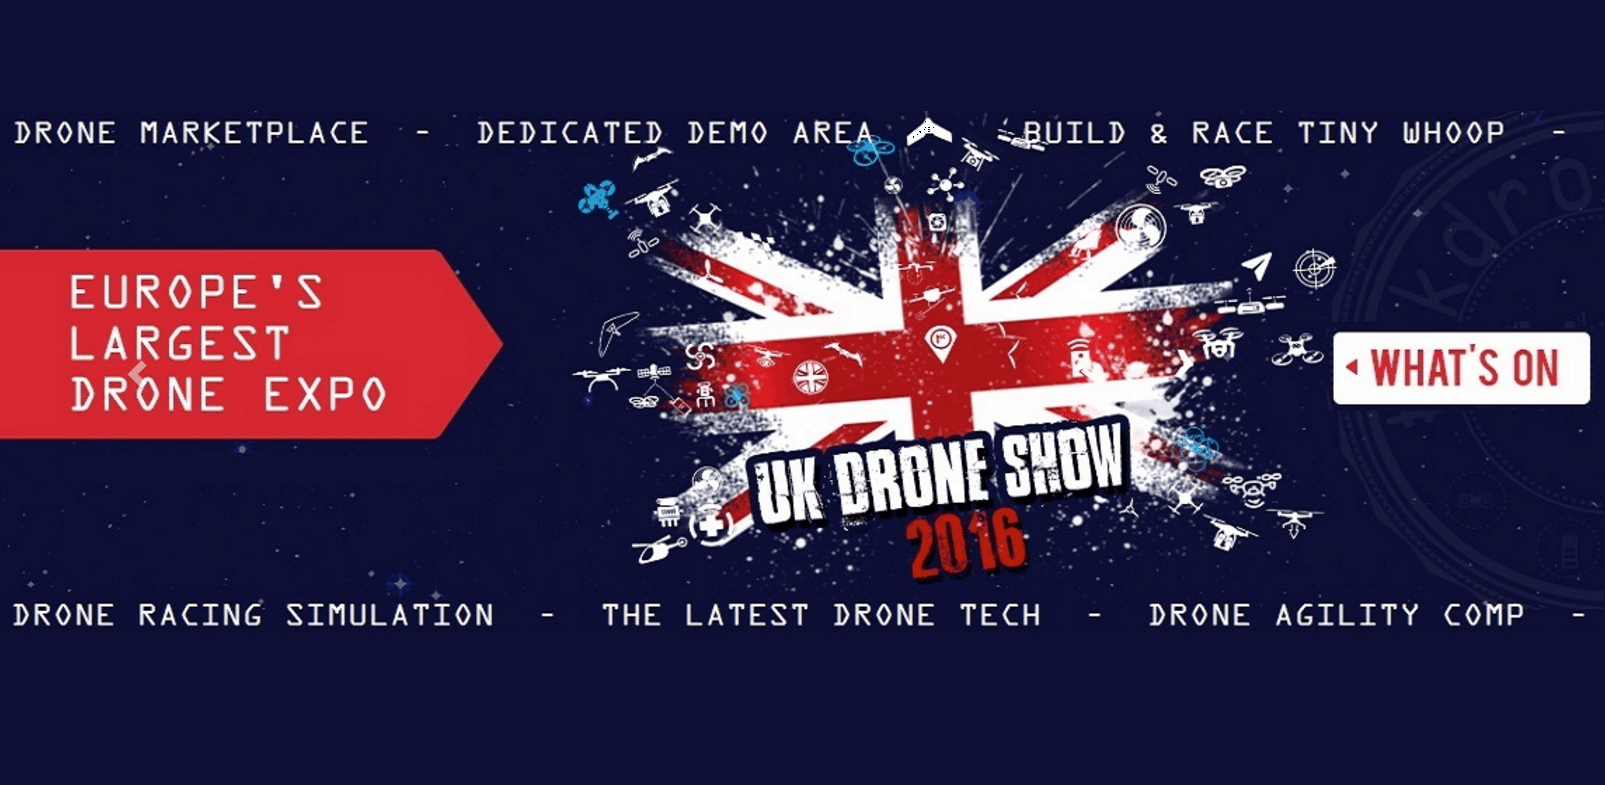 The UK Drone Show 2016, to be held at the NEC in Birmingham, UK.